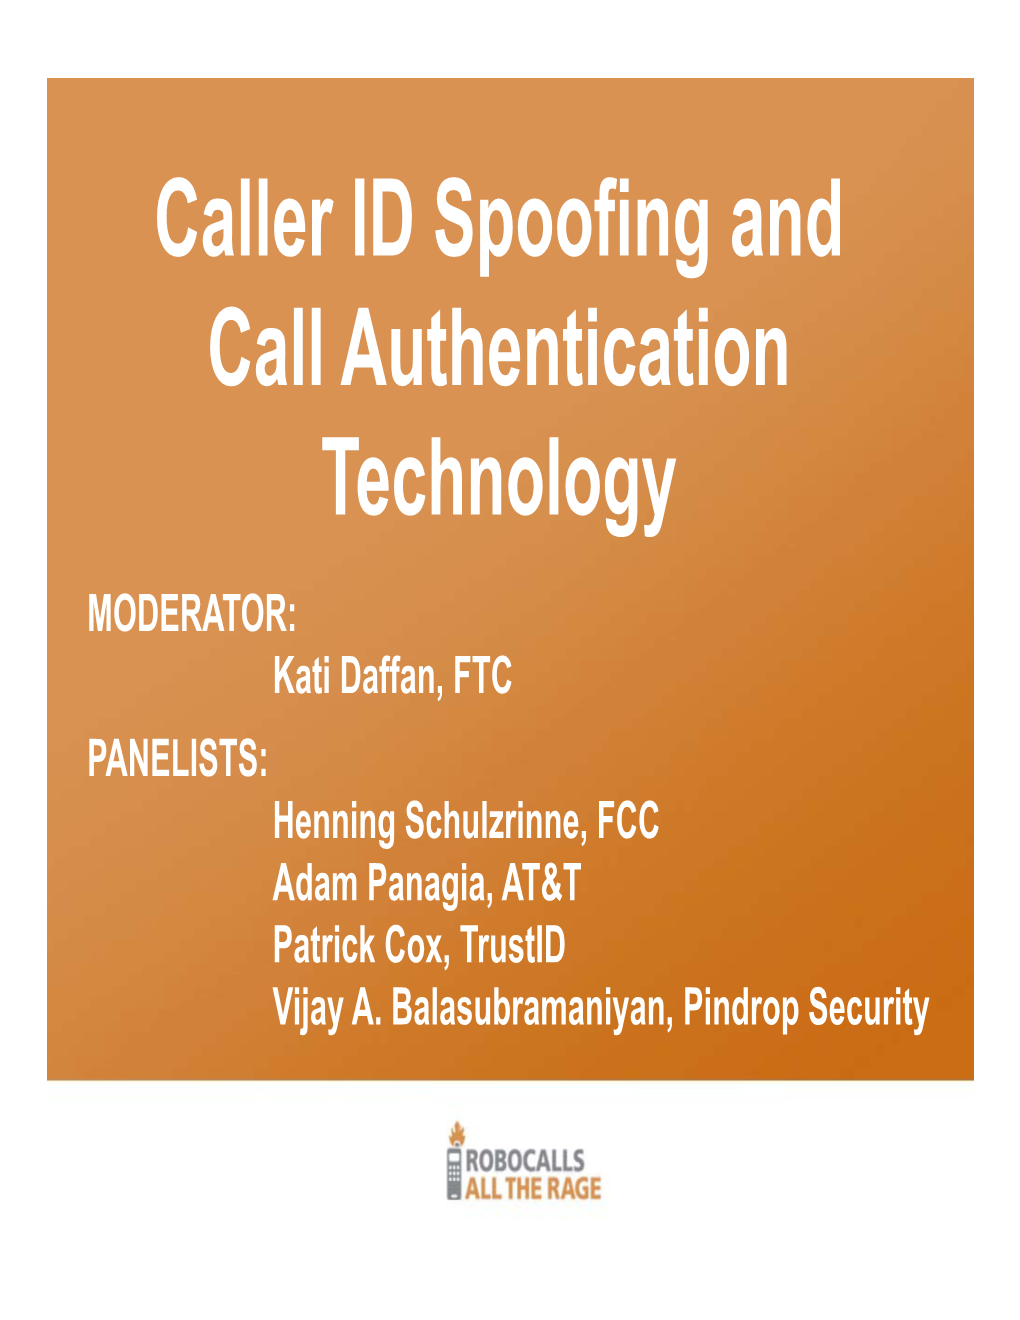 Caller ID Spoofing & Call Authentication